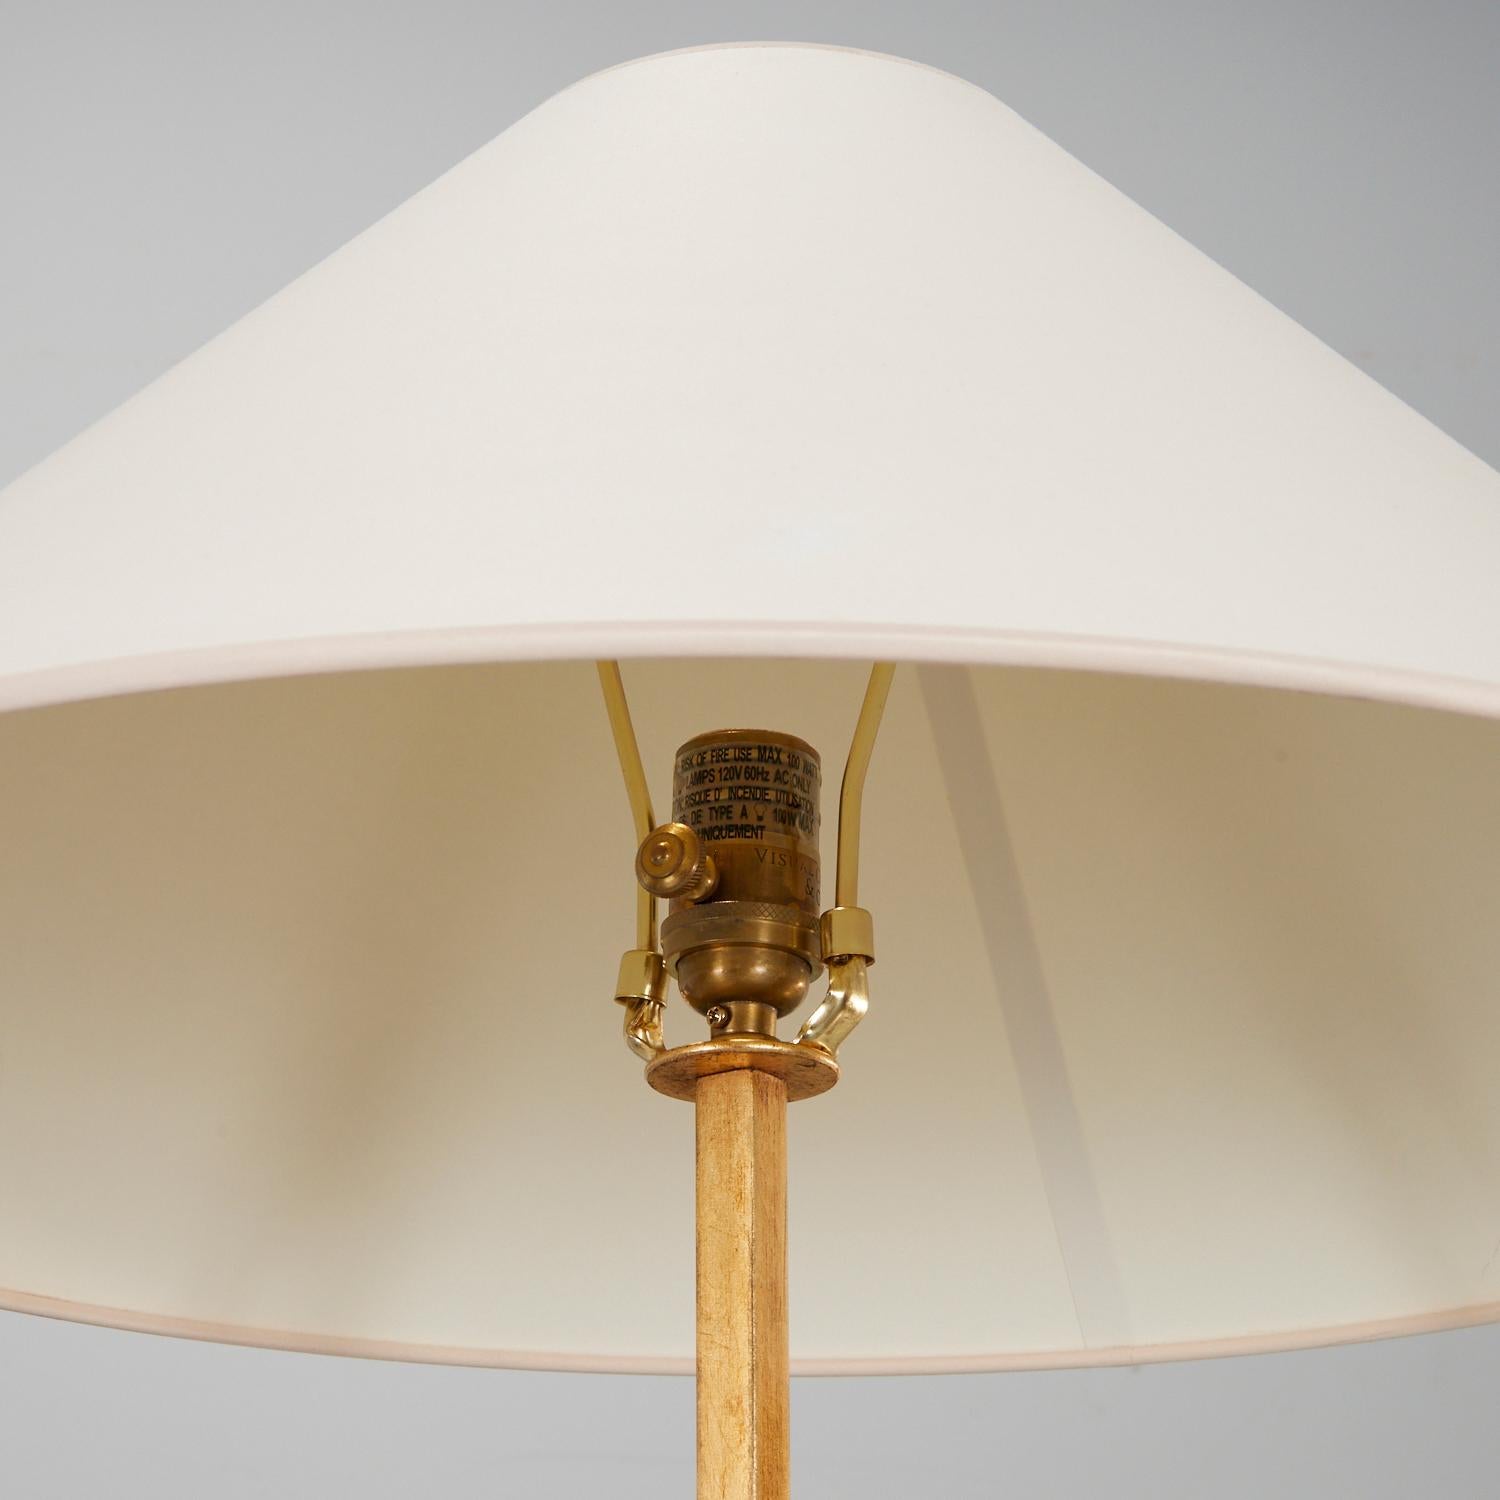 21st c., Lancaster floor lamp in iron with hand applied gilded finish and natural paper shade, marked 